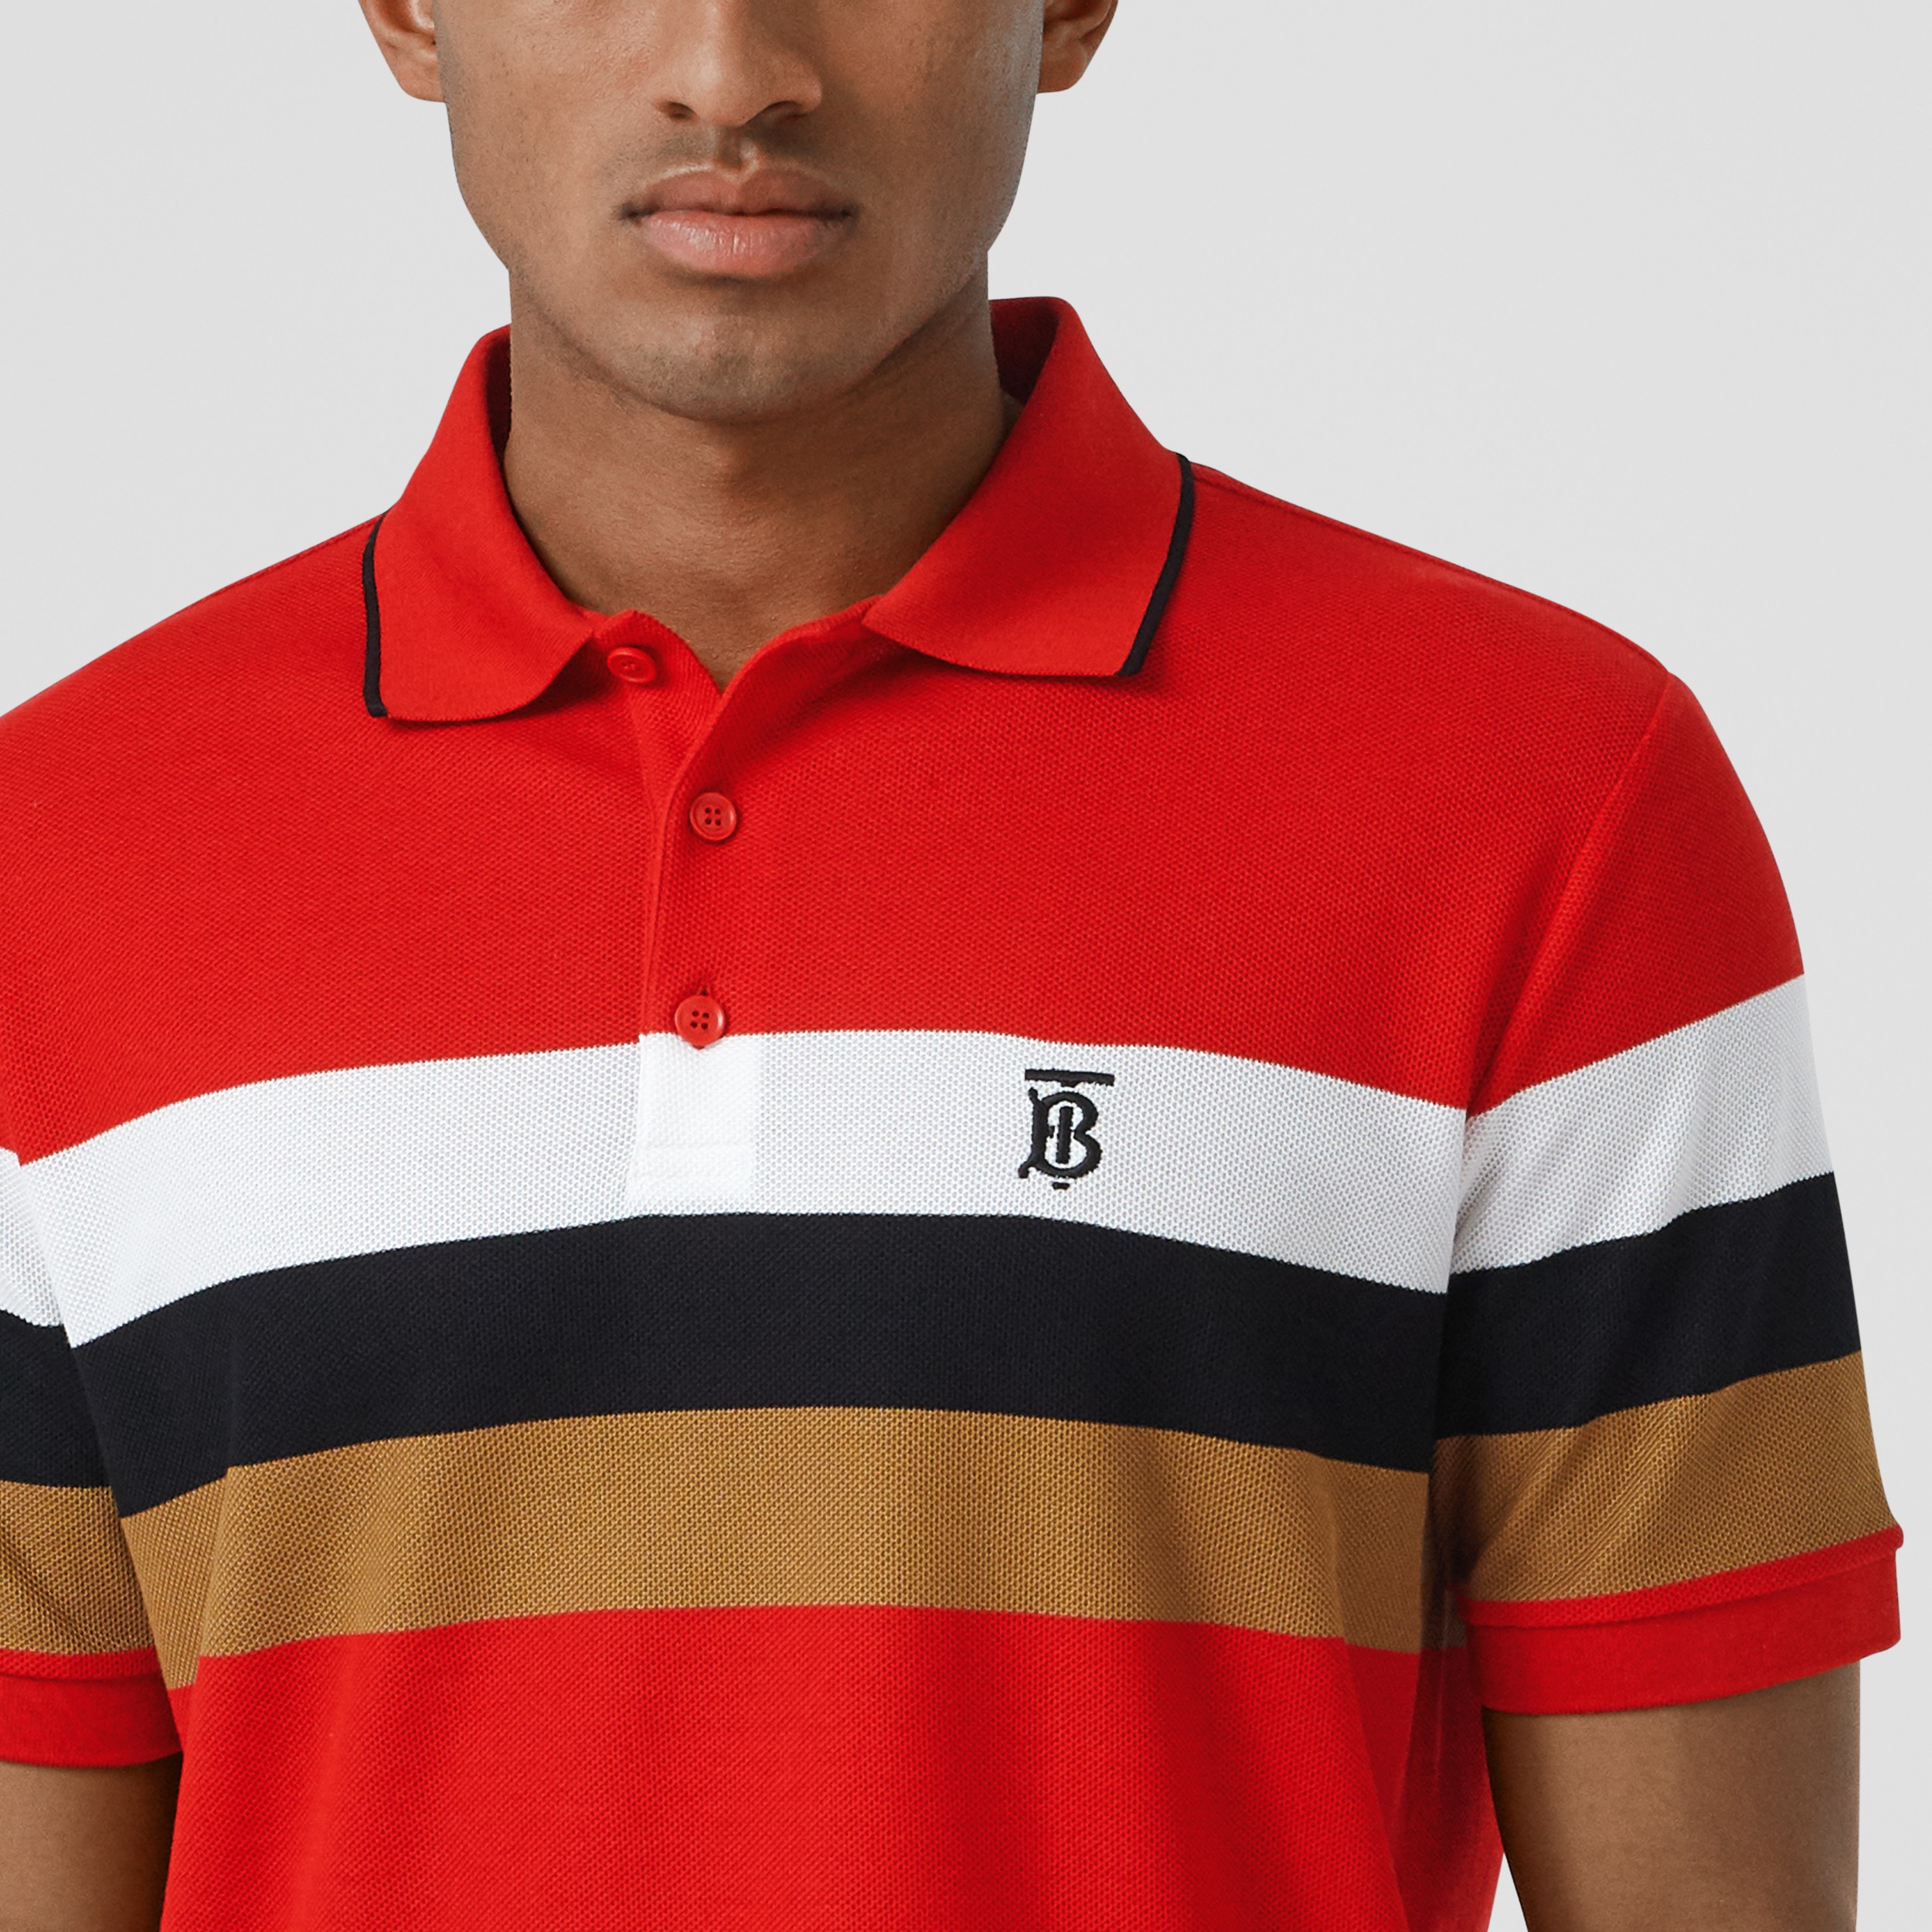 Monogram Motif Striped Cotton Polo Shirt in Bright Red - Men | Burberry United States